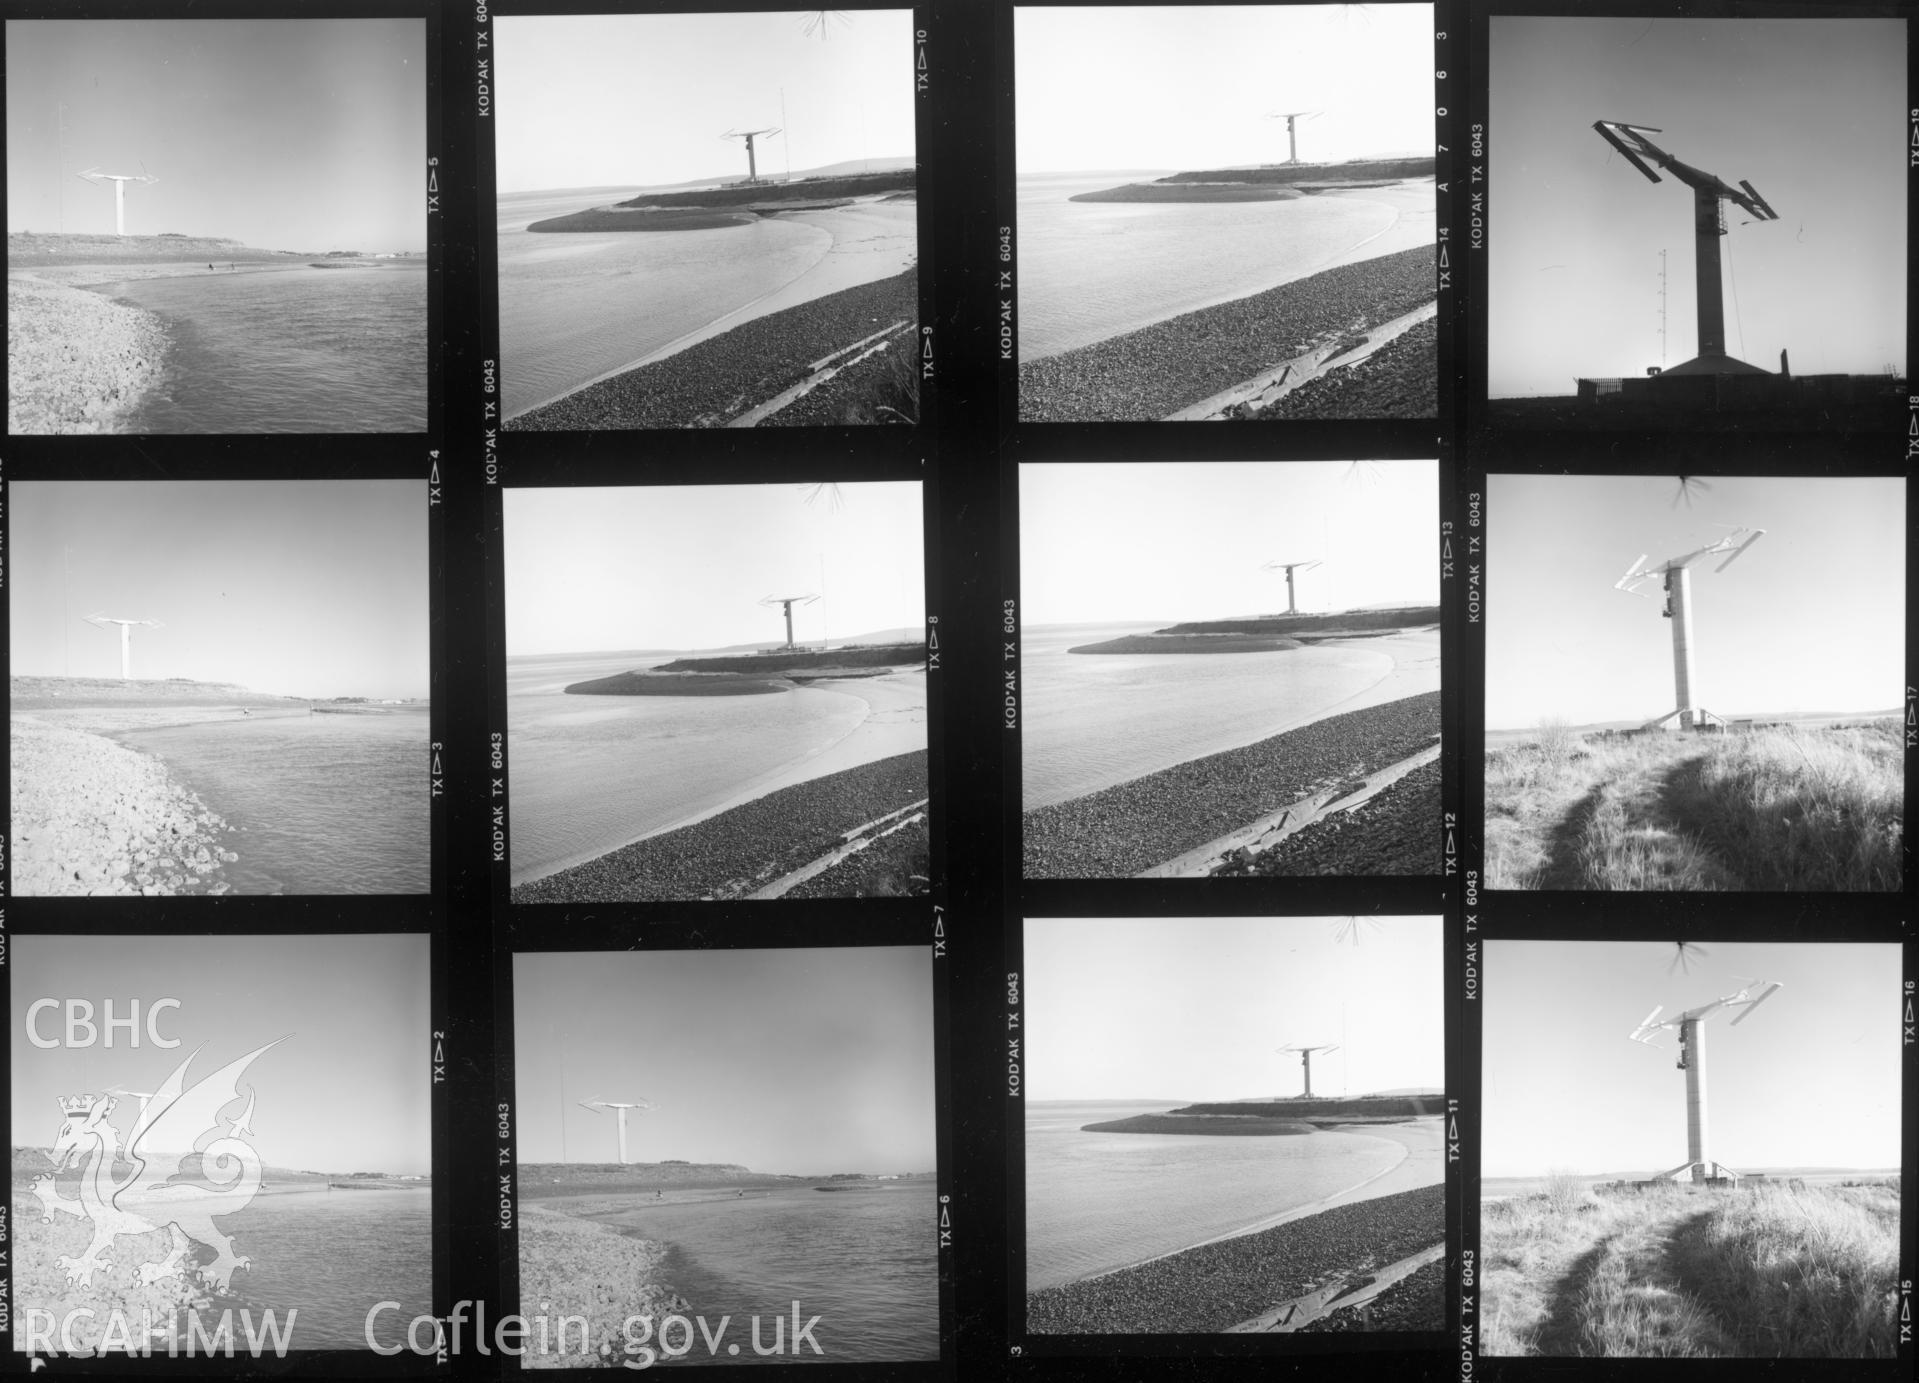 Contact sheet 1b of views of the prototype wind turbine at Carmarthen Bay in 1986. From the Central Office of Information Collection.